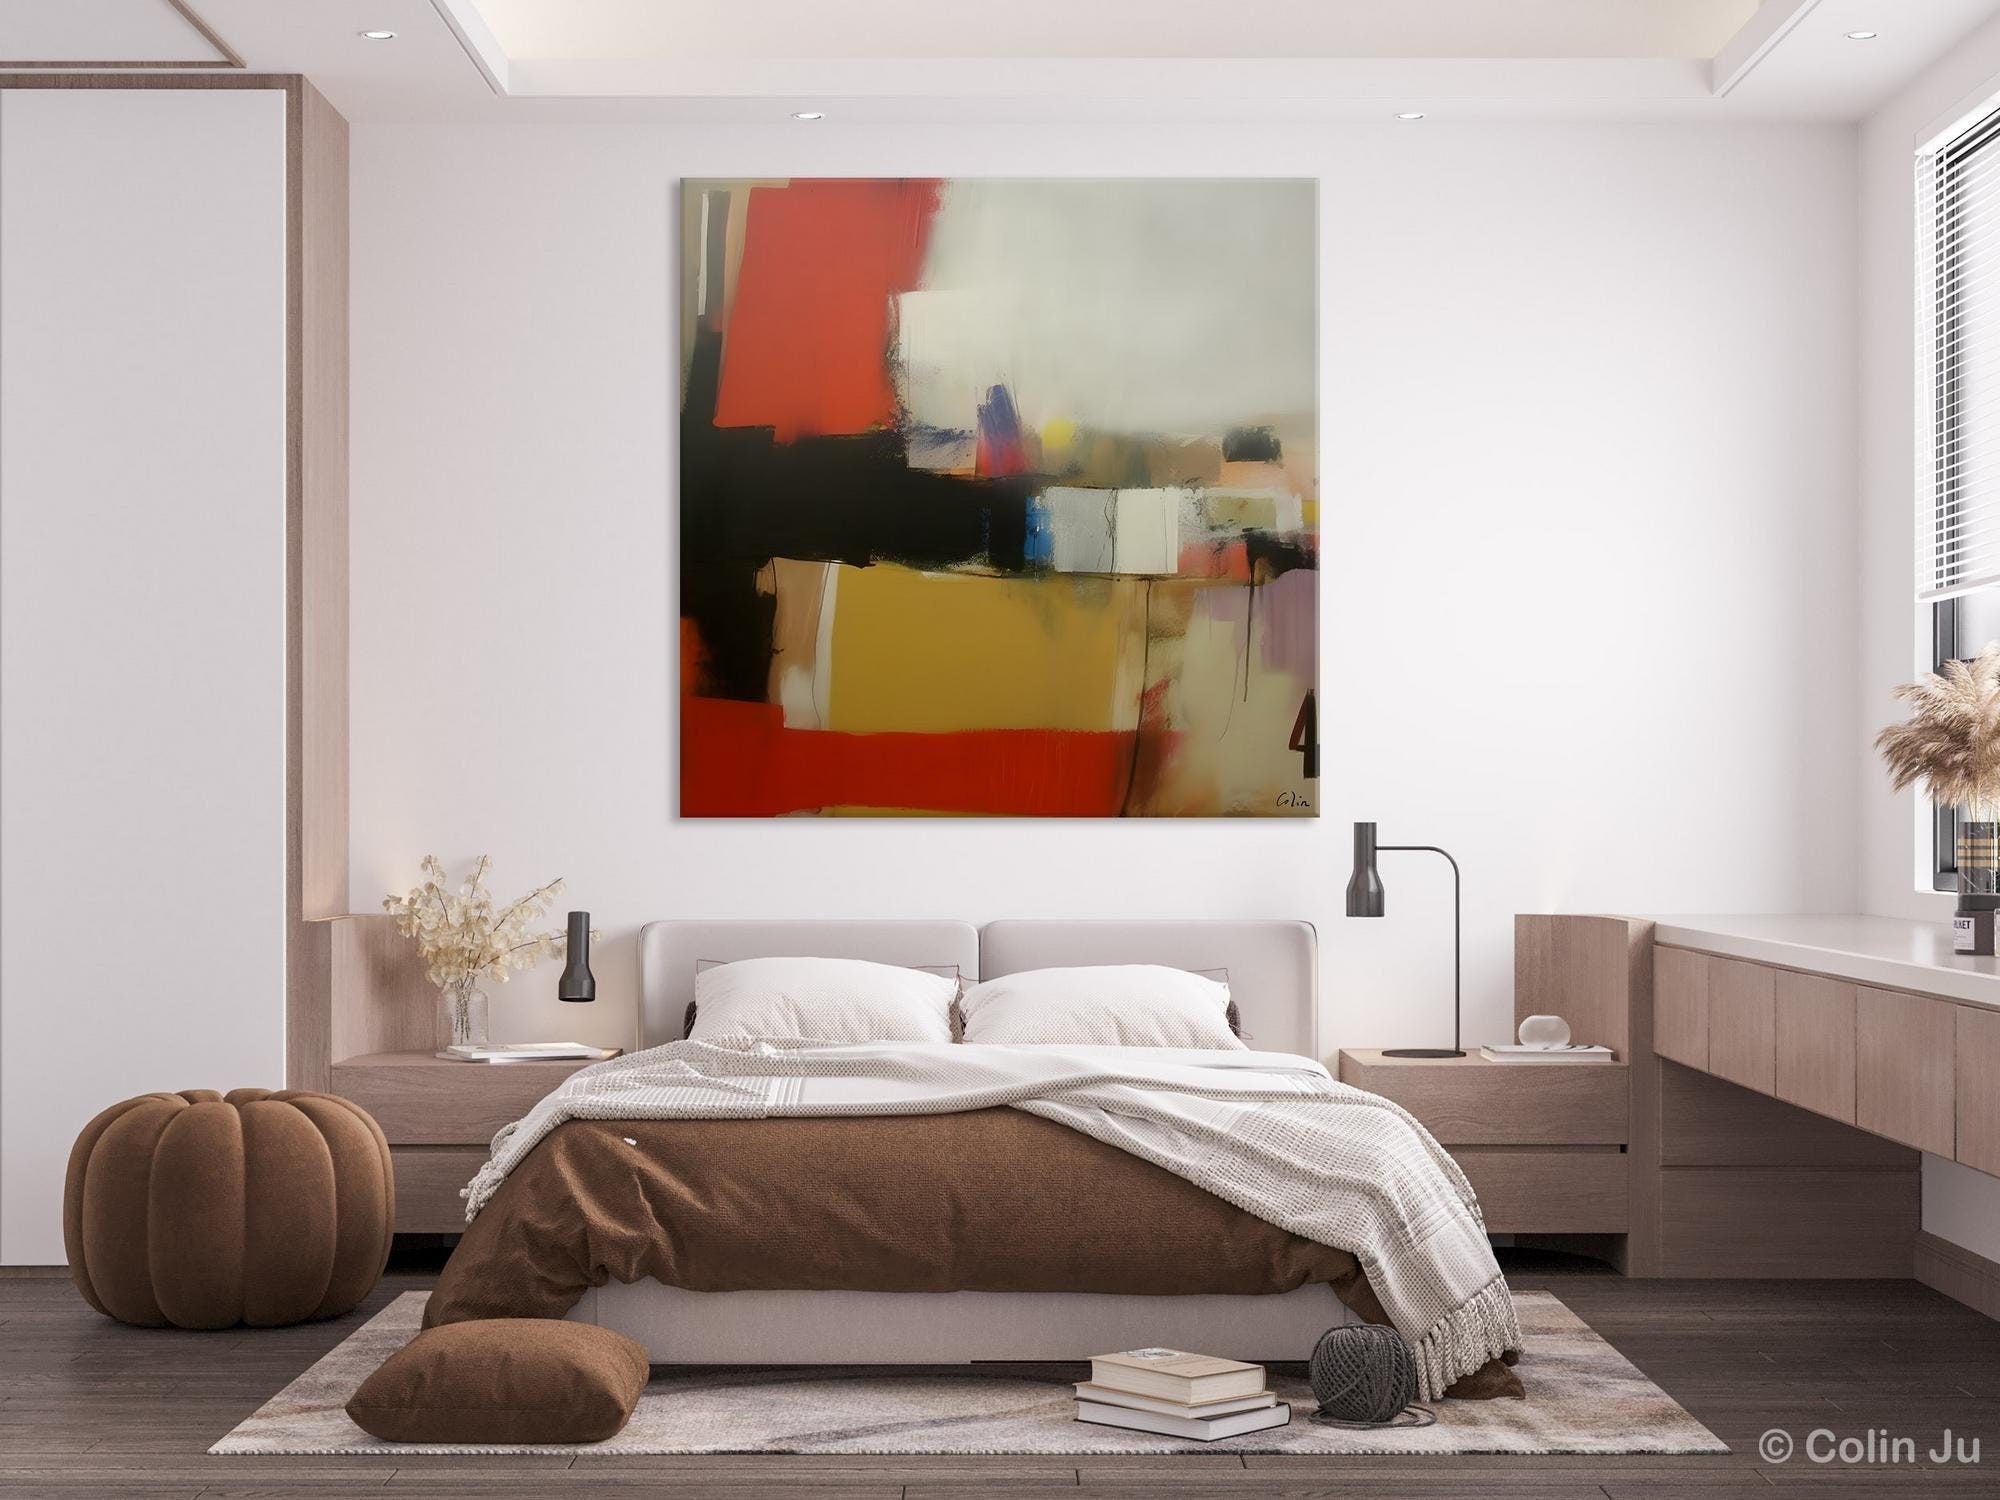 Modern Original Abstract Art, Canvas Paintings for Sale, Large Wall Art for Bedroom, Geometric Modern Acrylic Art, Contemporary Canvas Art-Silvia Home Craft